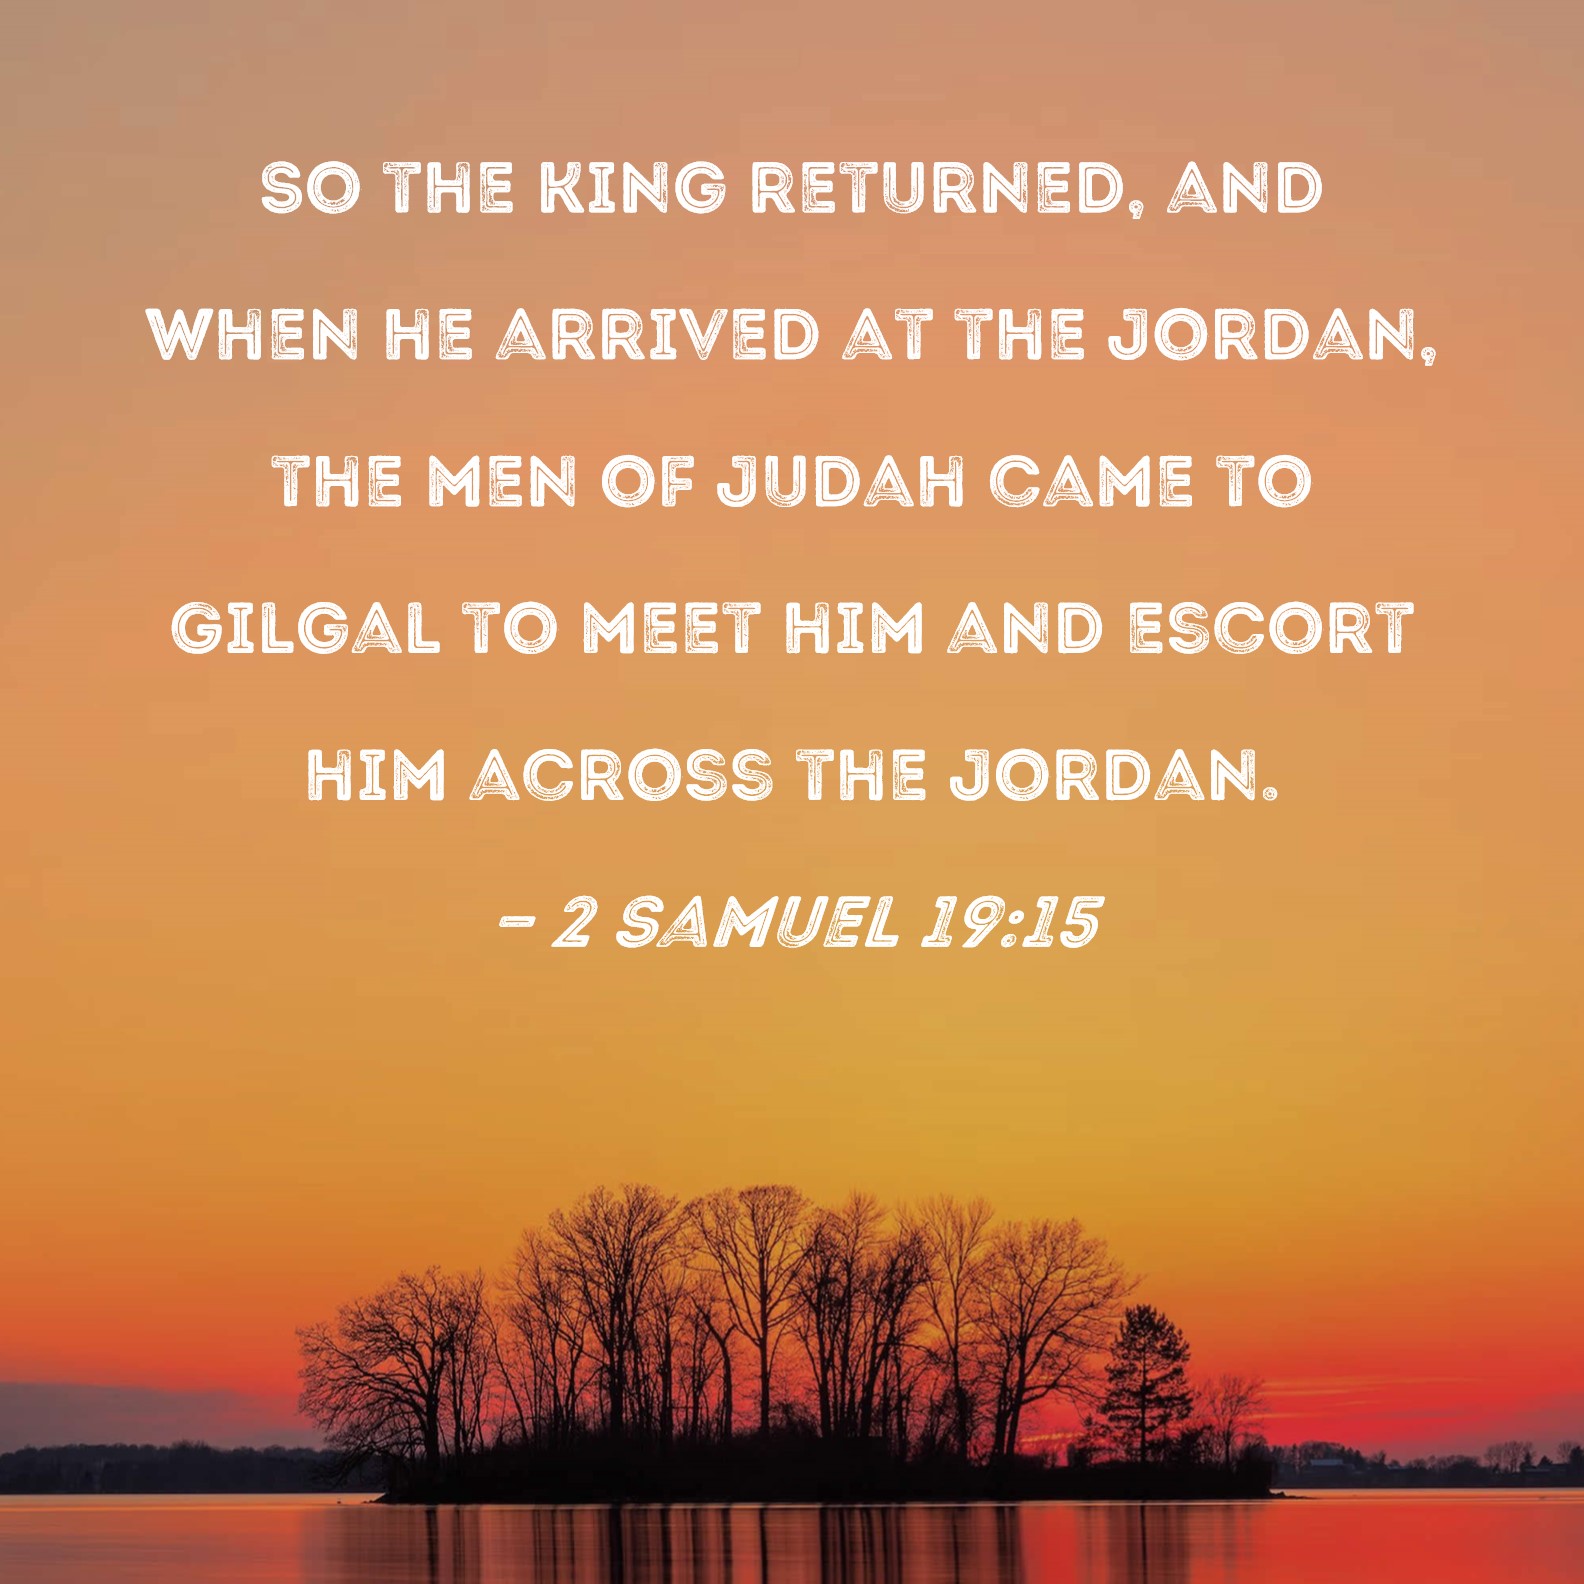 2 Samuel 19:39 So all the people crossed the Jordan, and then the